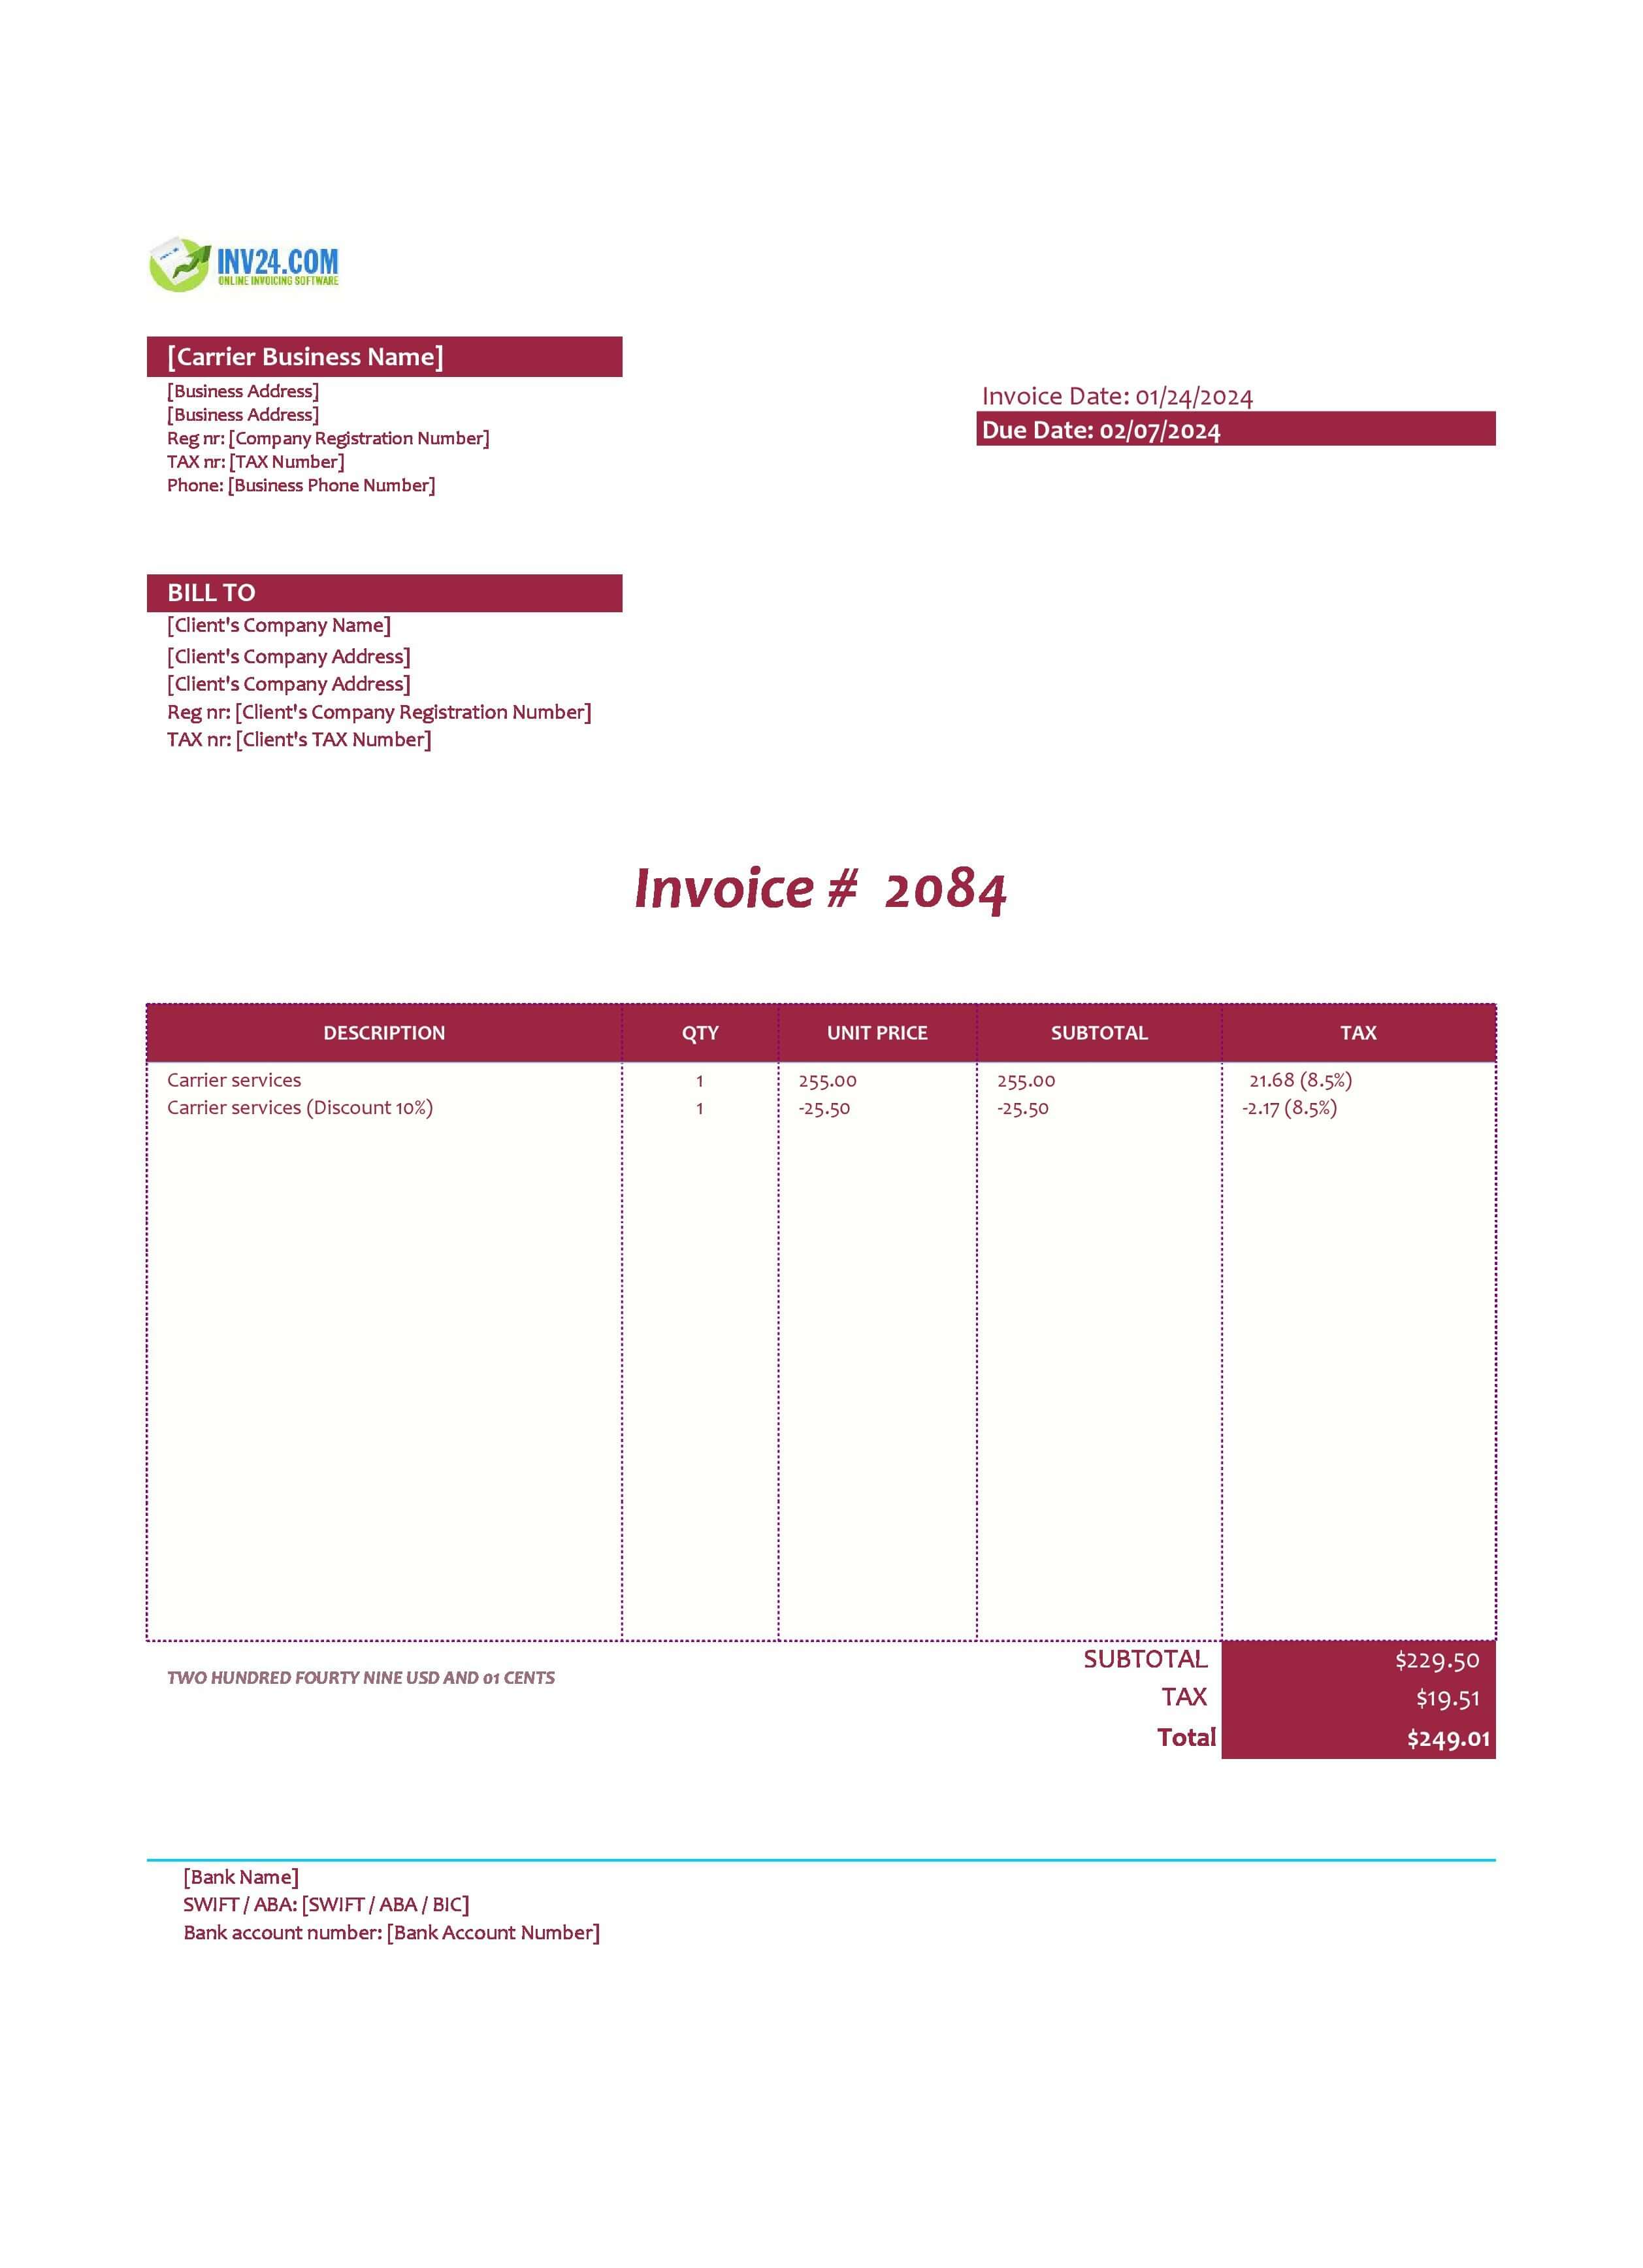 Carrier invoice template